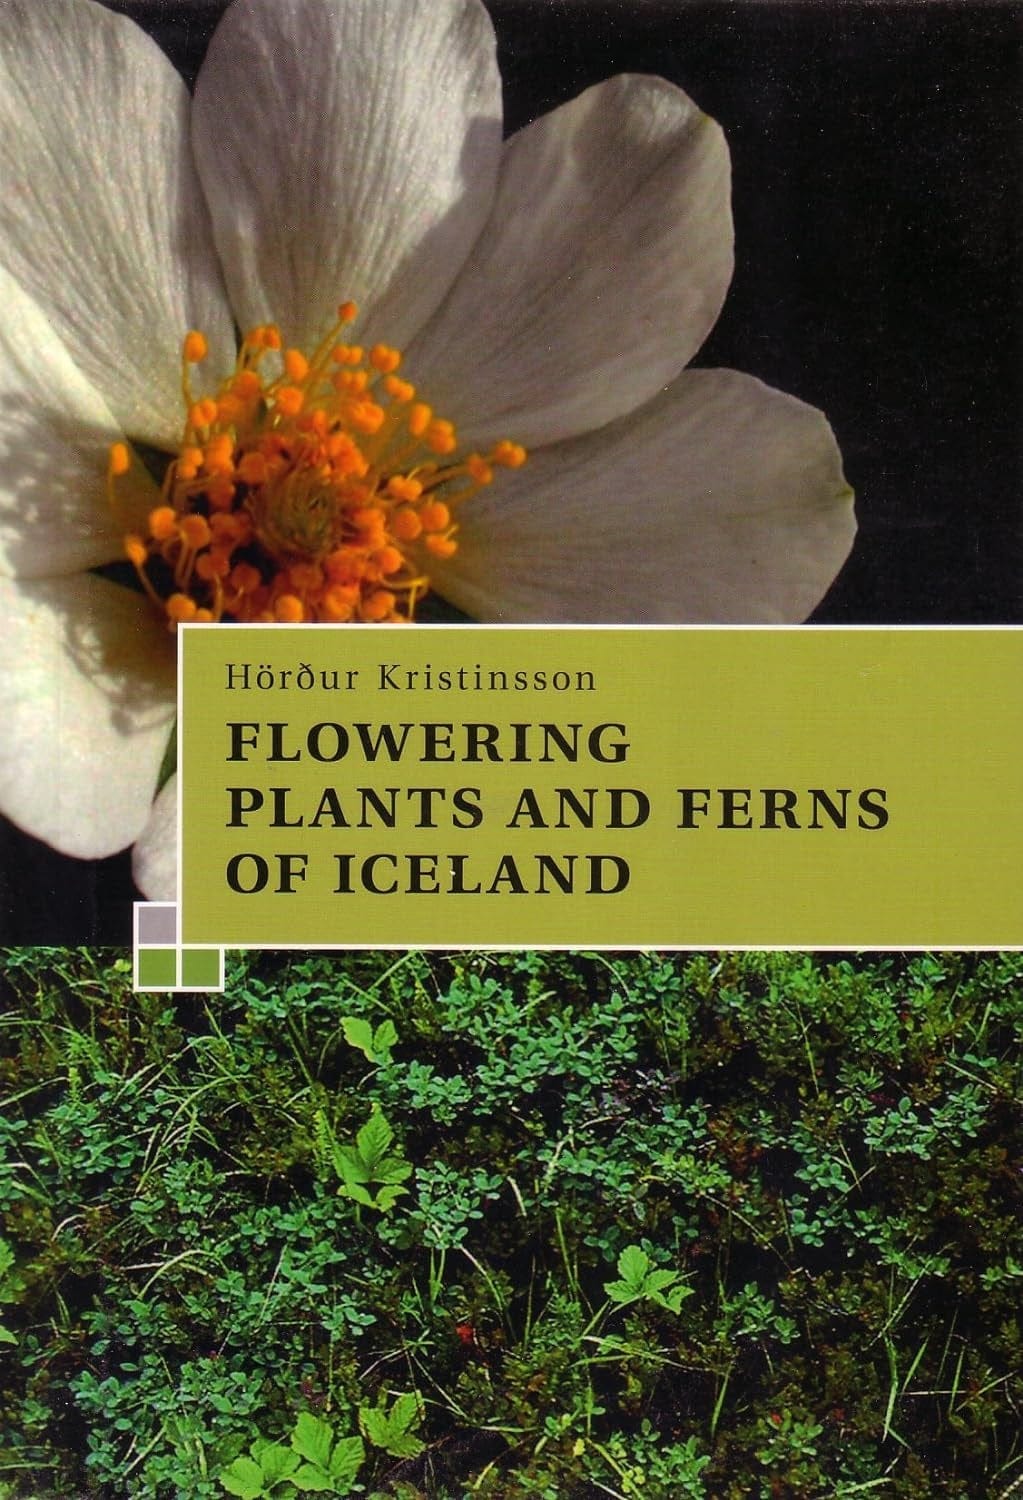 Flowering plants and ferns of Iceland - The Icelandic Store